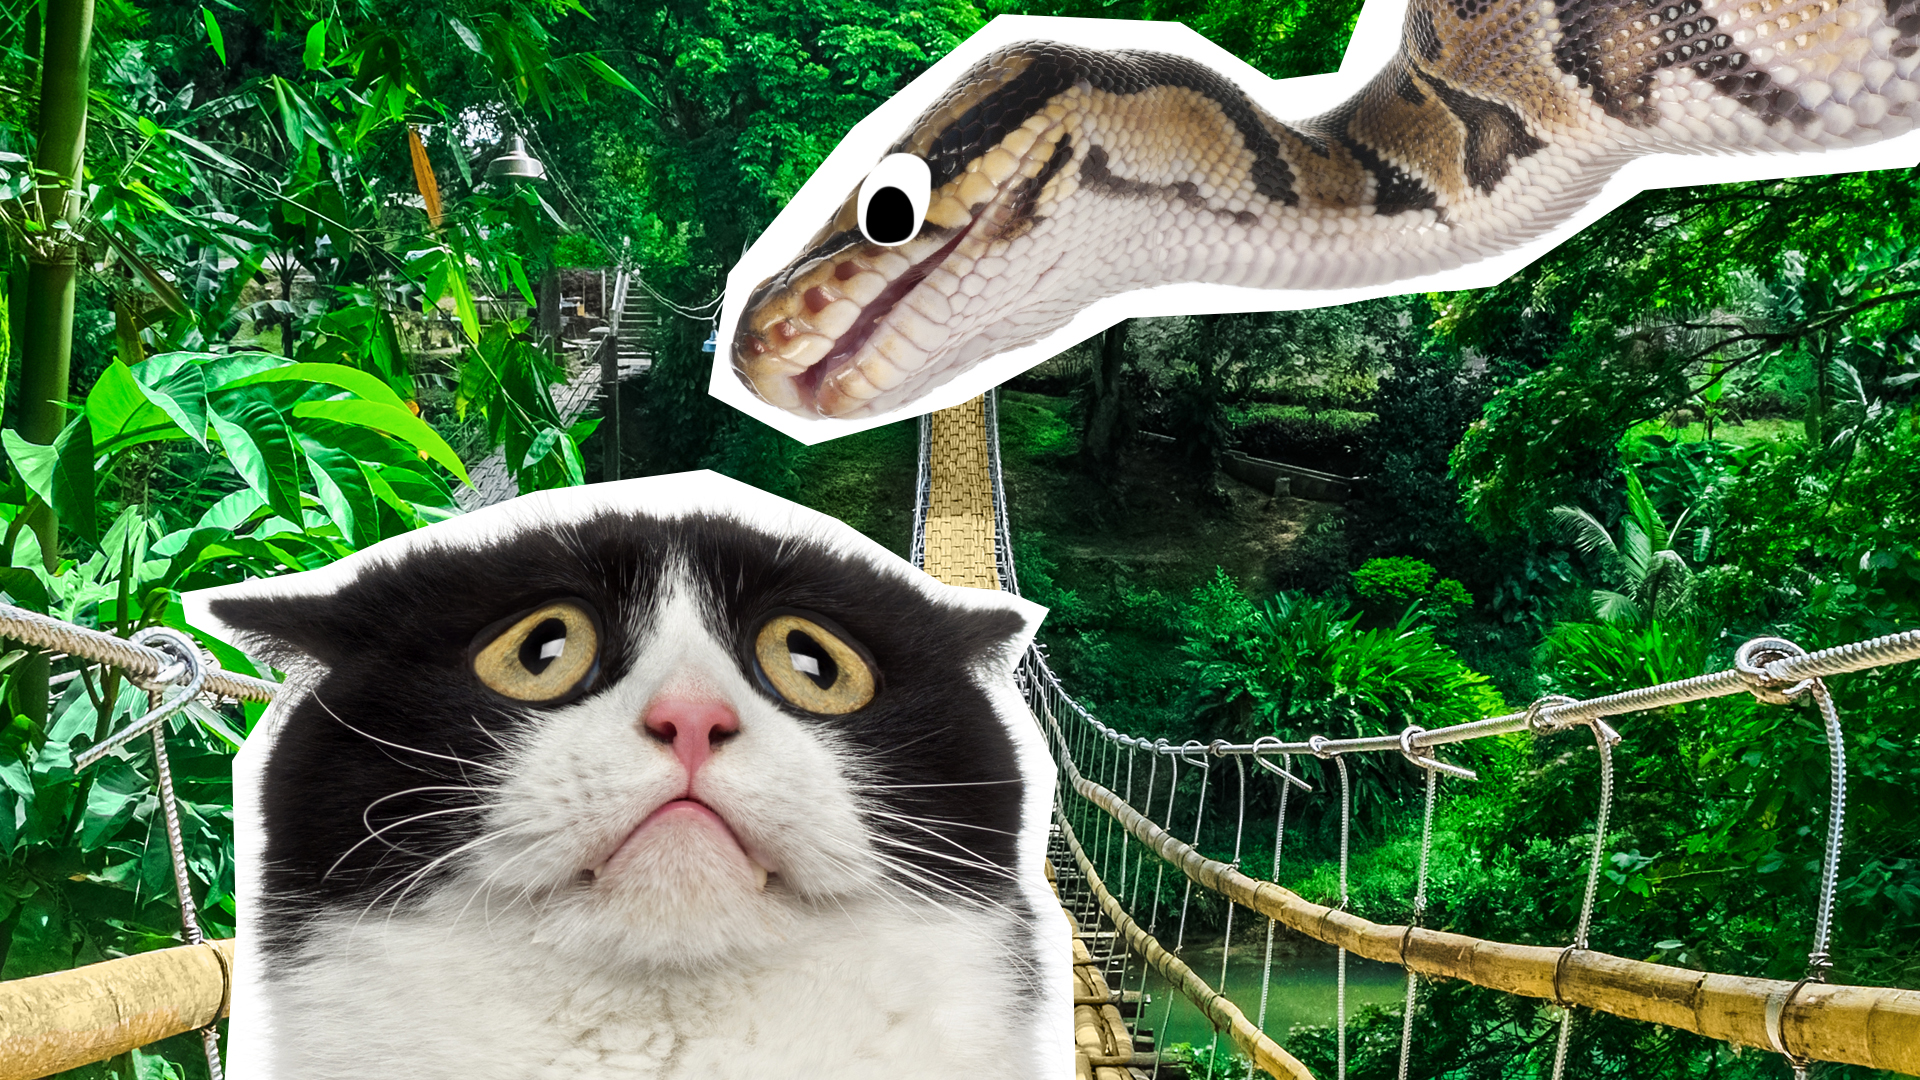 A cat looking scared at a snake